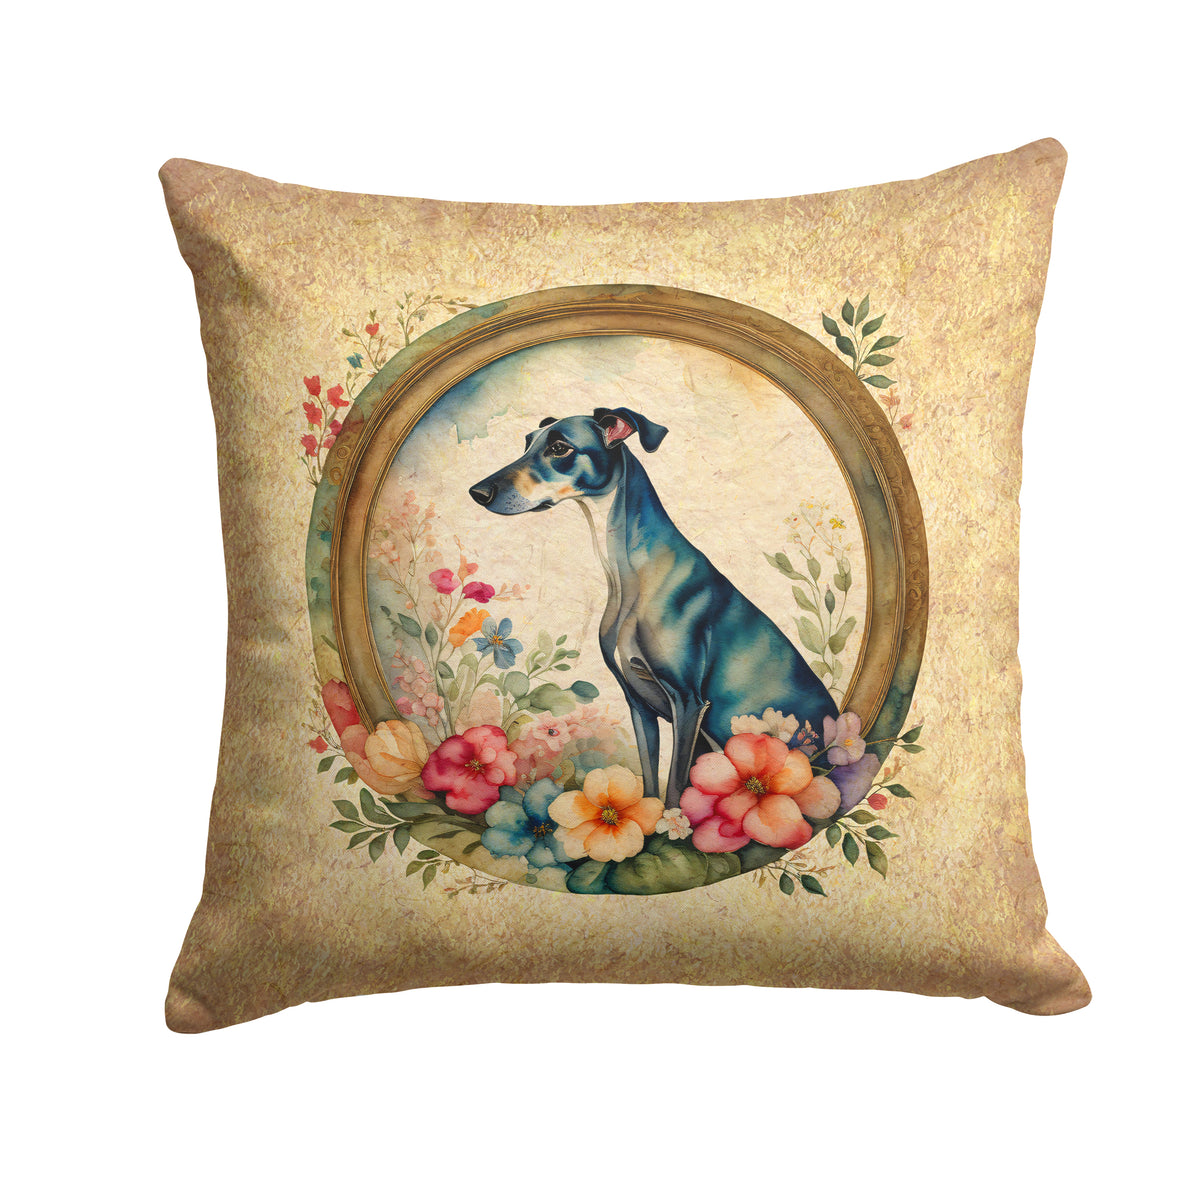 Buy this Greyhound and Flowers Fabric Decorative Pillow